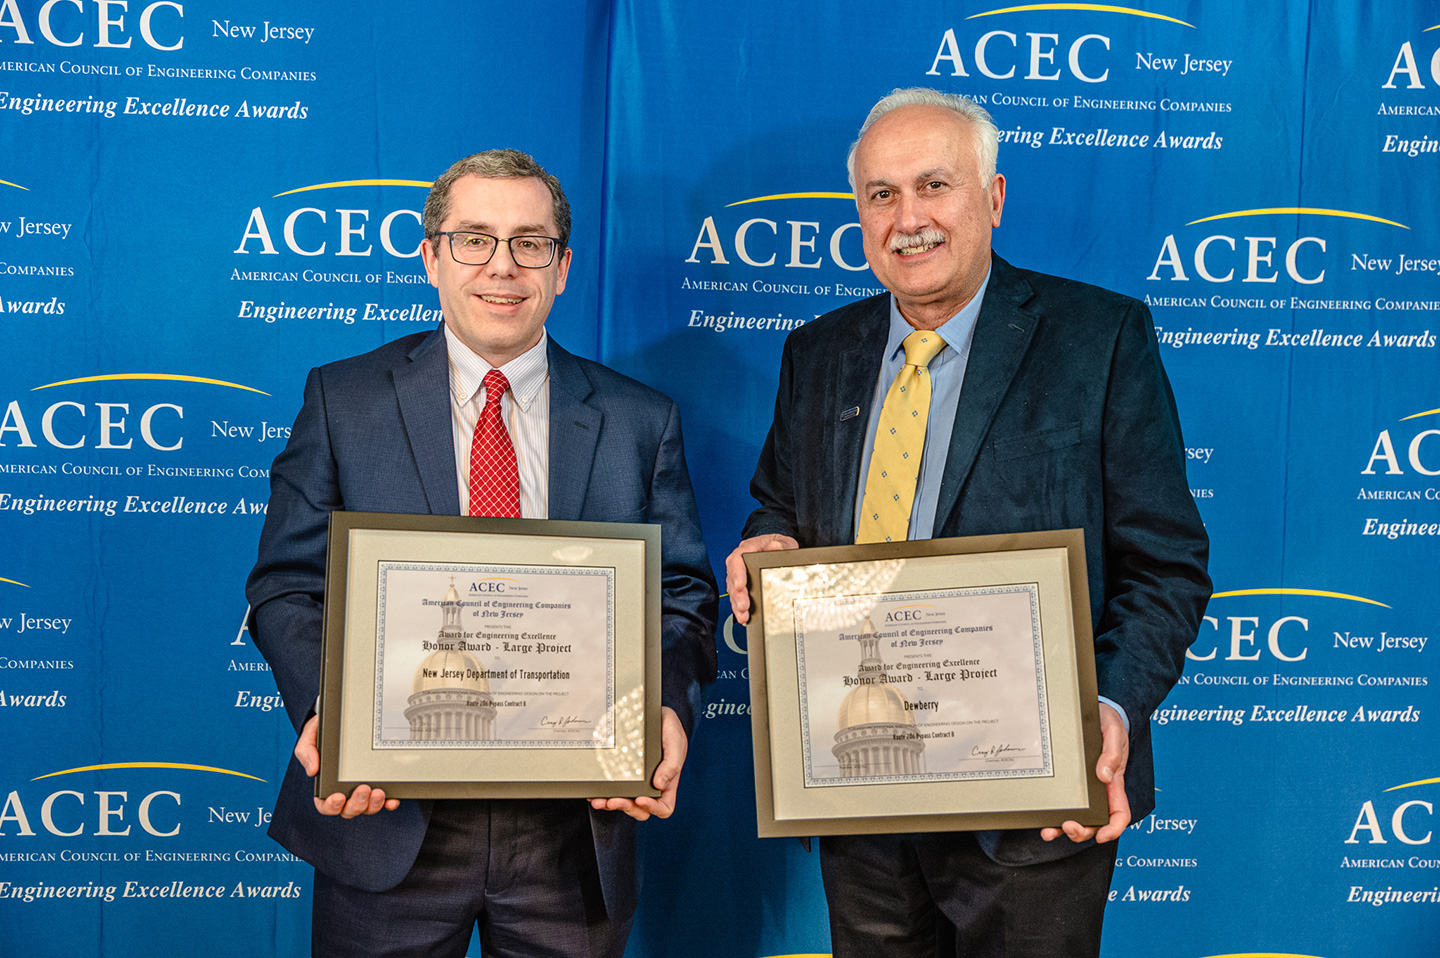 David Hill and H. Ali Vaezi accepted the award at the ACEC New Jersey Chapter’s Awards Banquet. Photo courtesy of ACEC New Jersey.